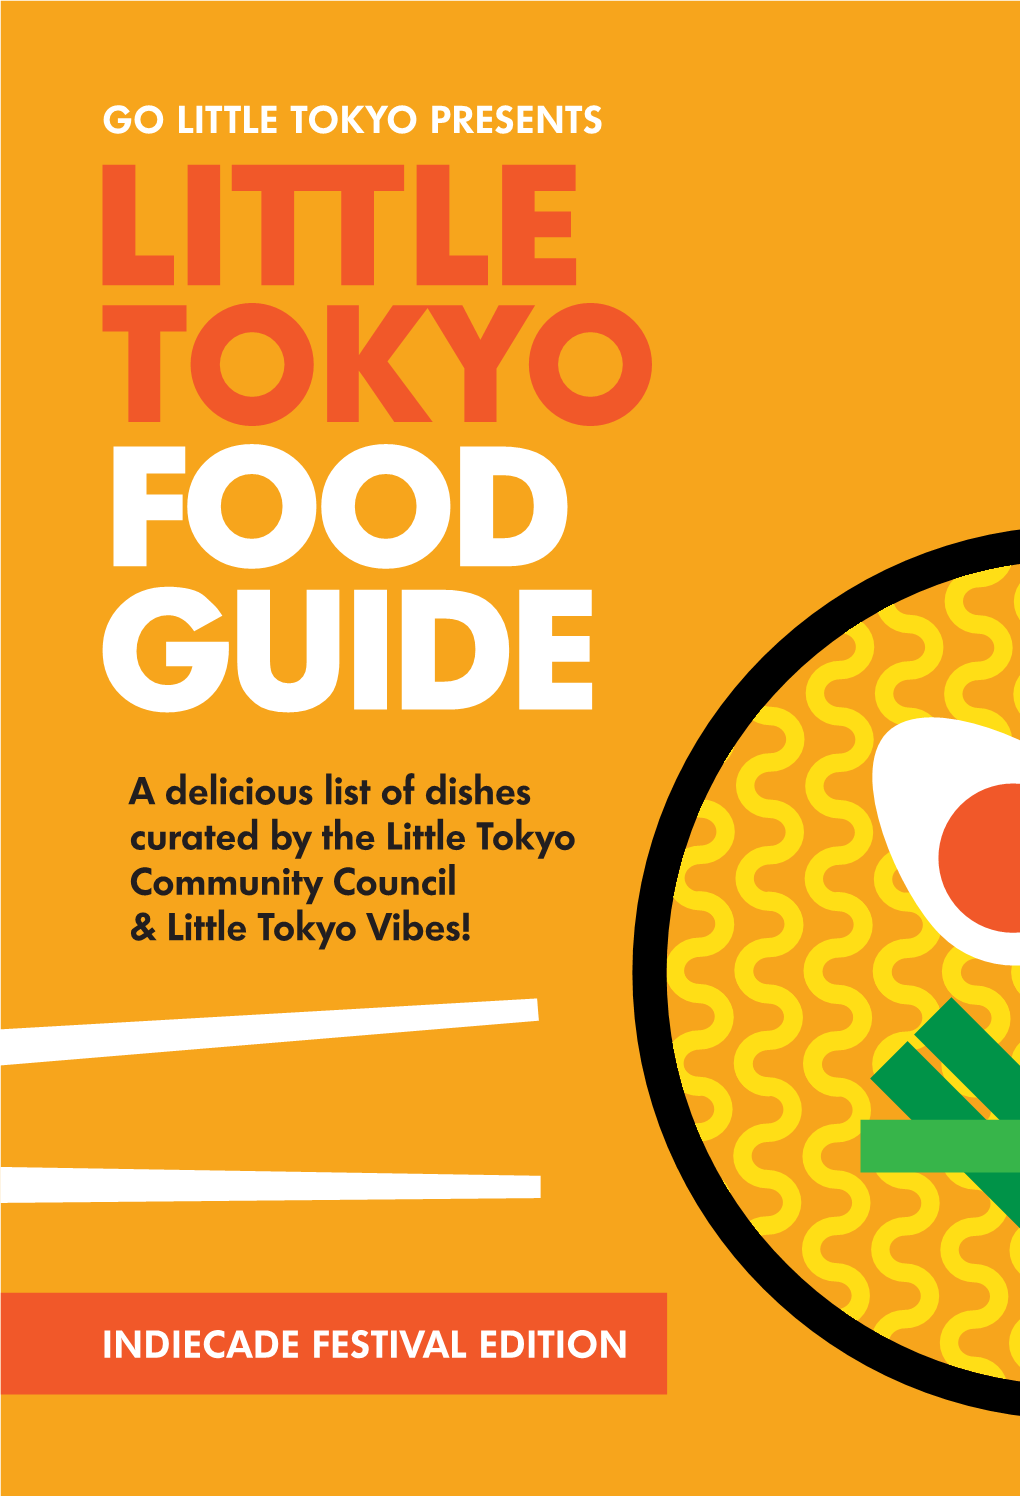 A Delicious List of Dishes Curated by the Little Tokyo Community Council & Little Tokyo Vibes!